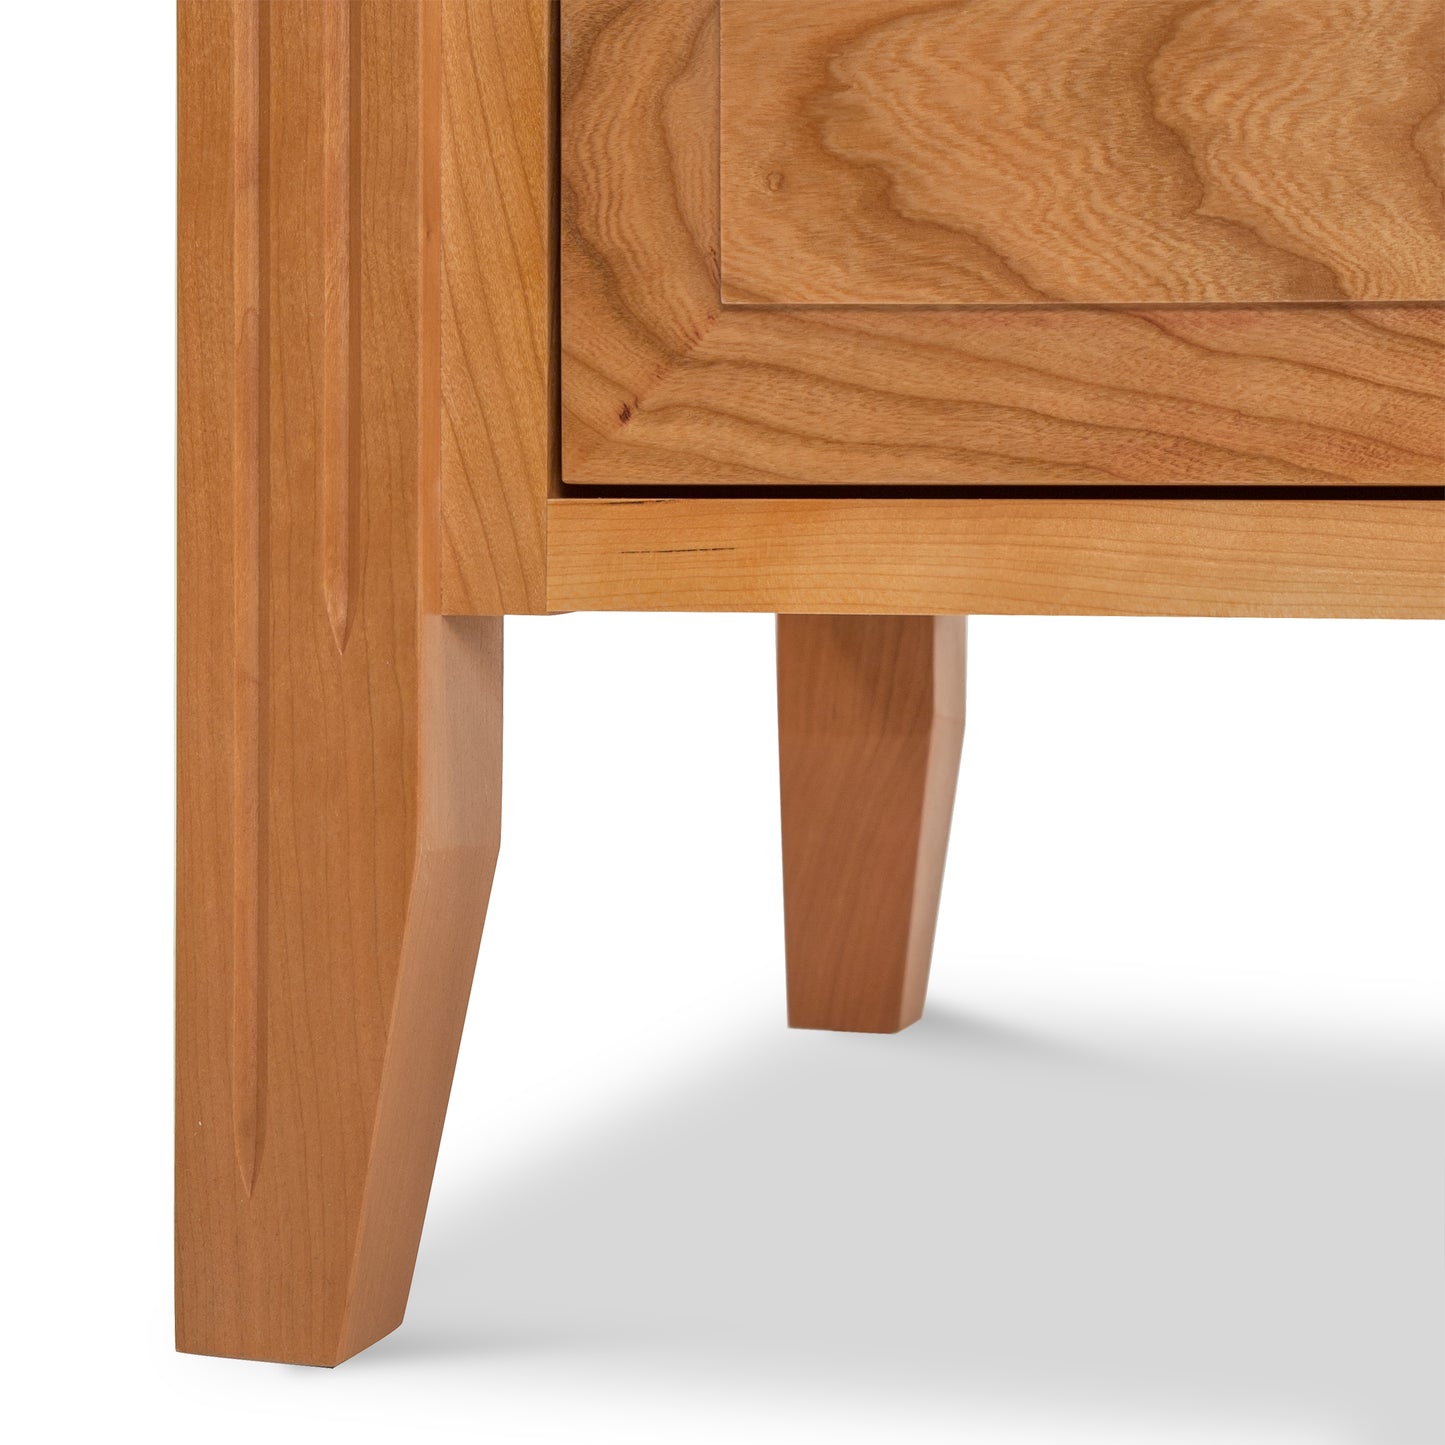 A close up of a Renfrew Shaker 3-Drawer Nightstand by Lyndon Furniture.